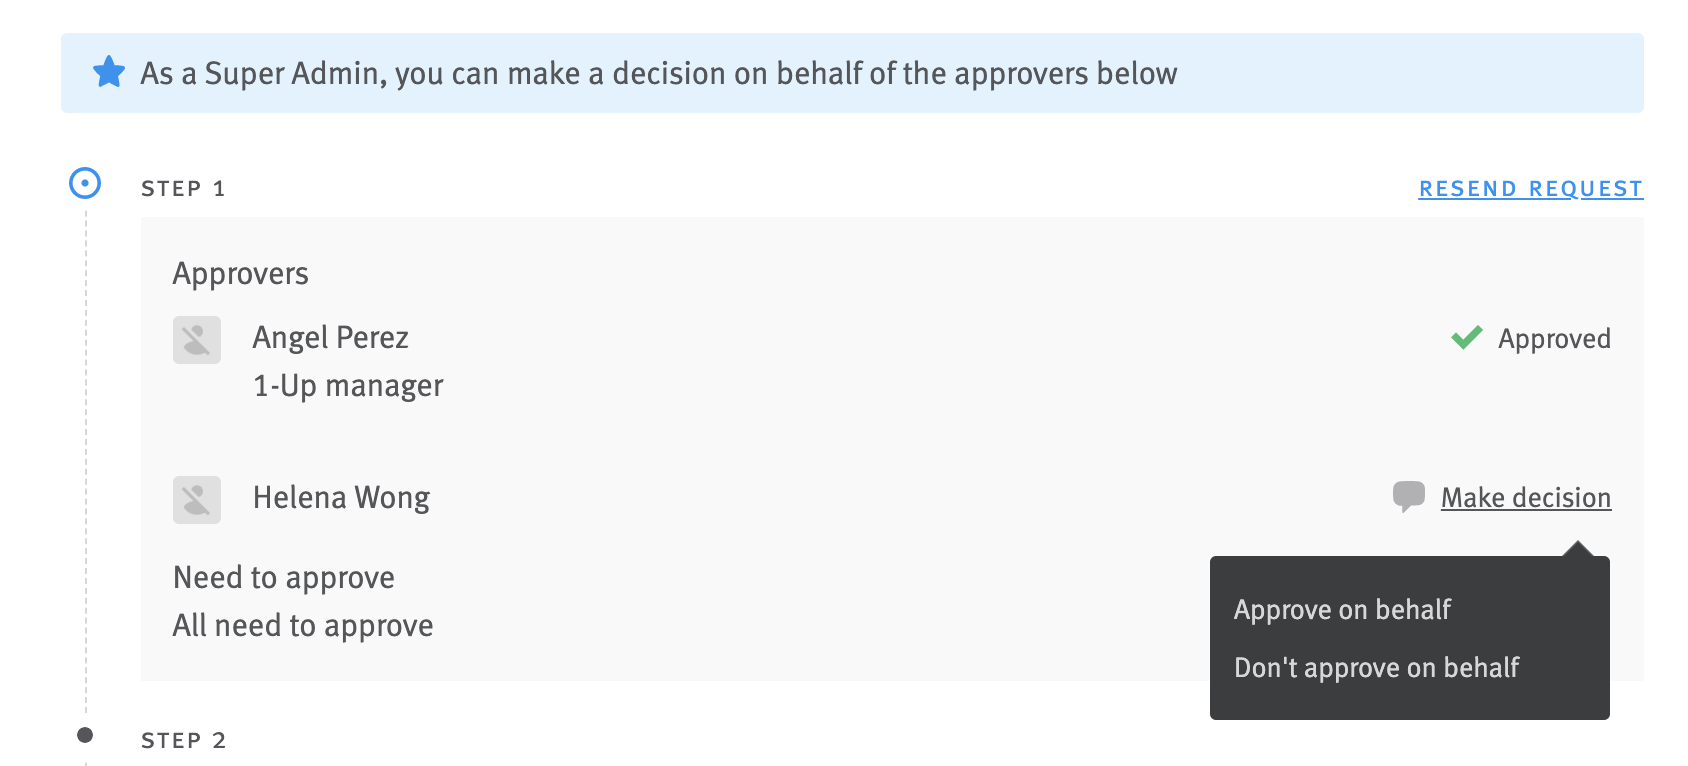 Close up of offer approval modal with banner reading that as a Super Admin the user can make a decision on behalf of the approvers listed below. A pop over extends from the words 'Make decision' beside of of the approvers names, with options to approve on behalf or don't approve on behalf.